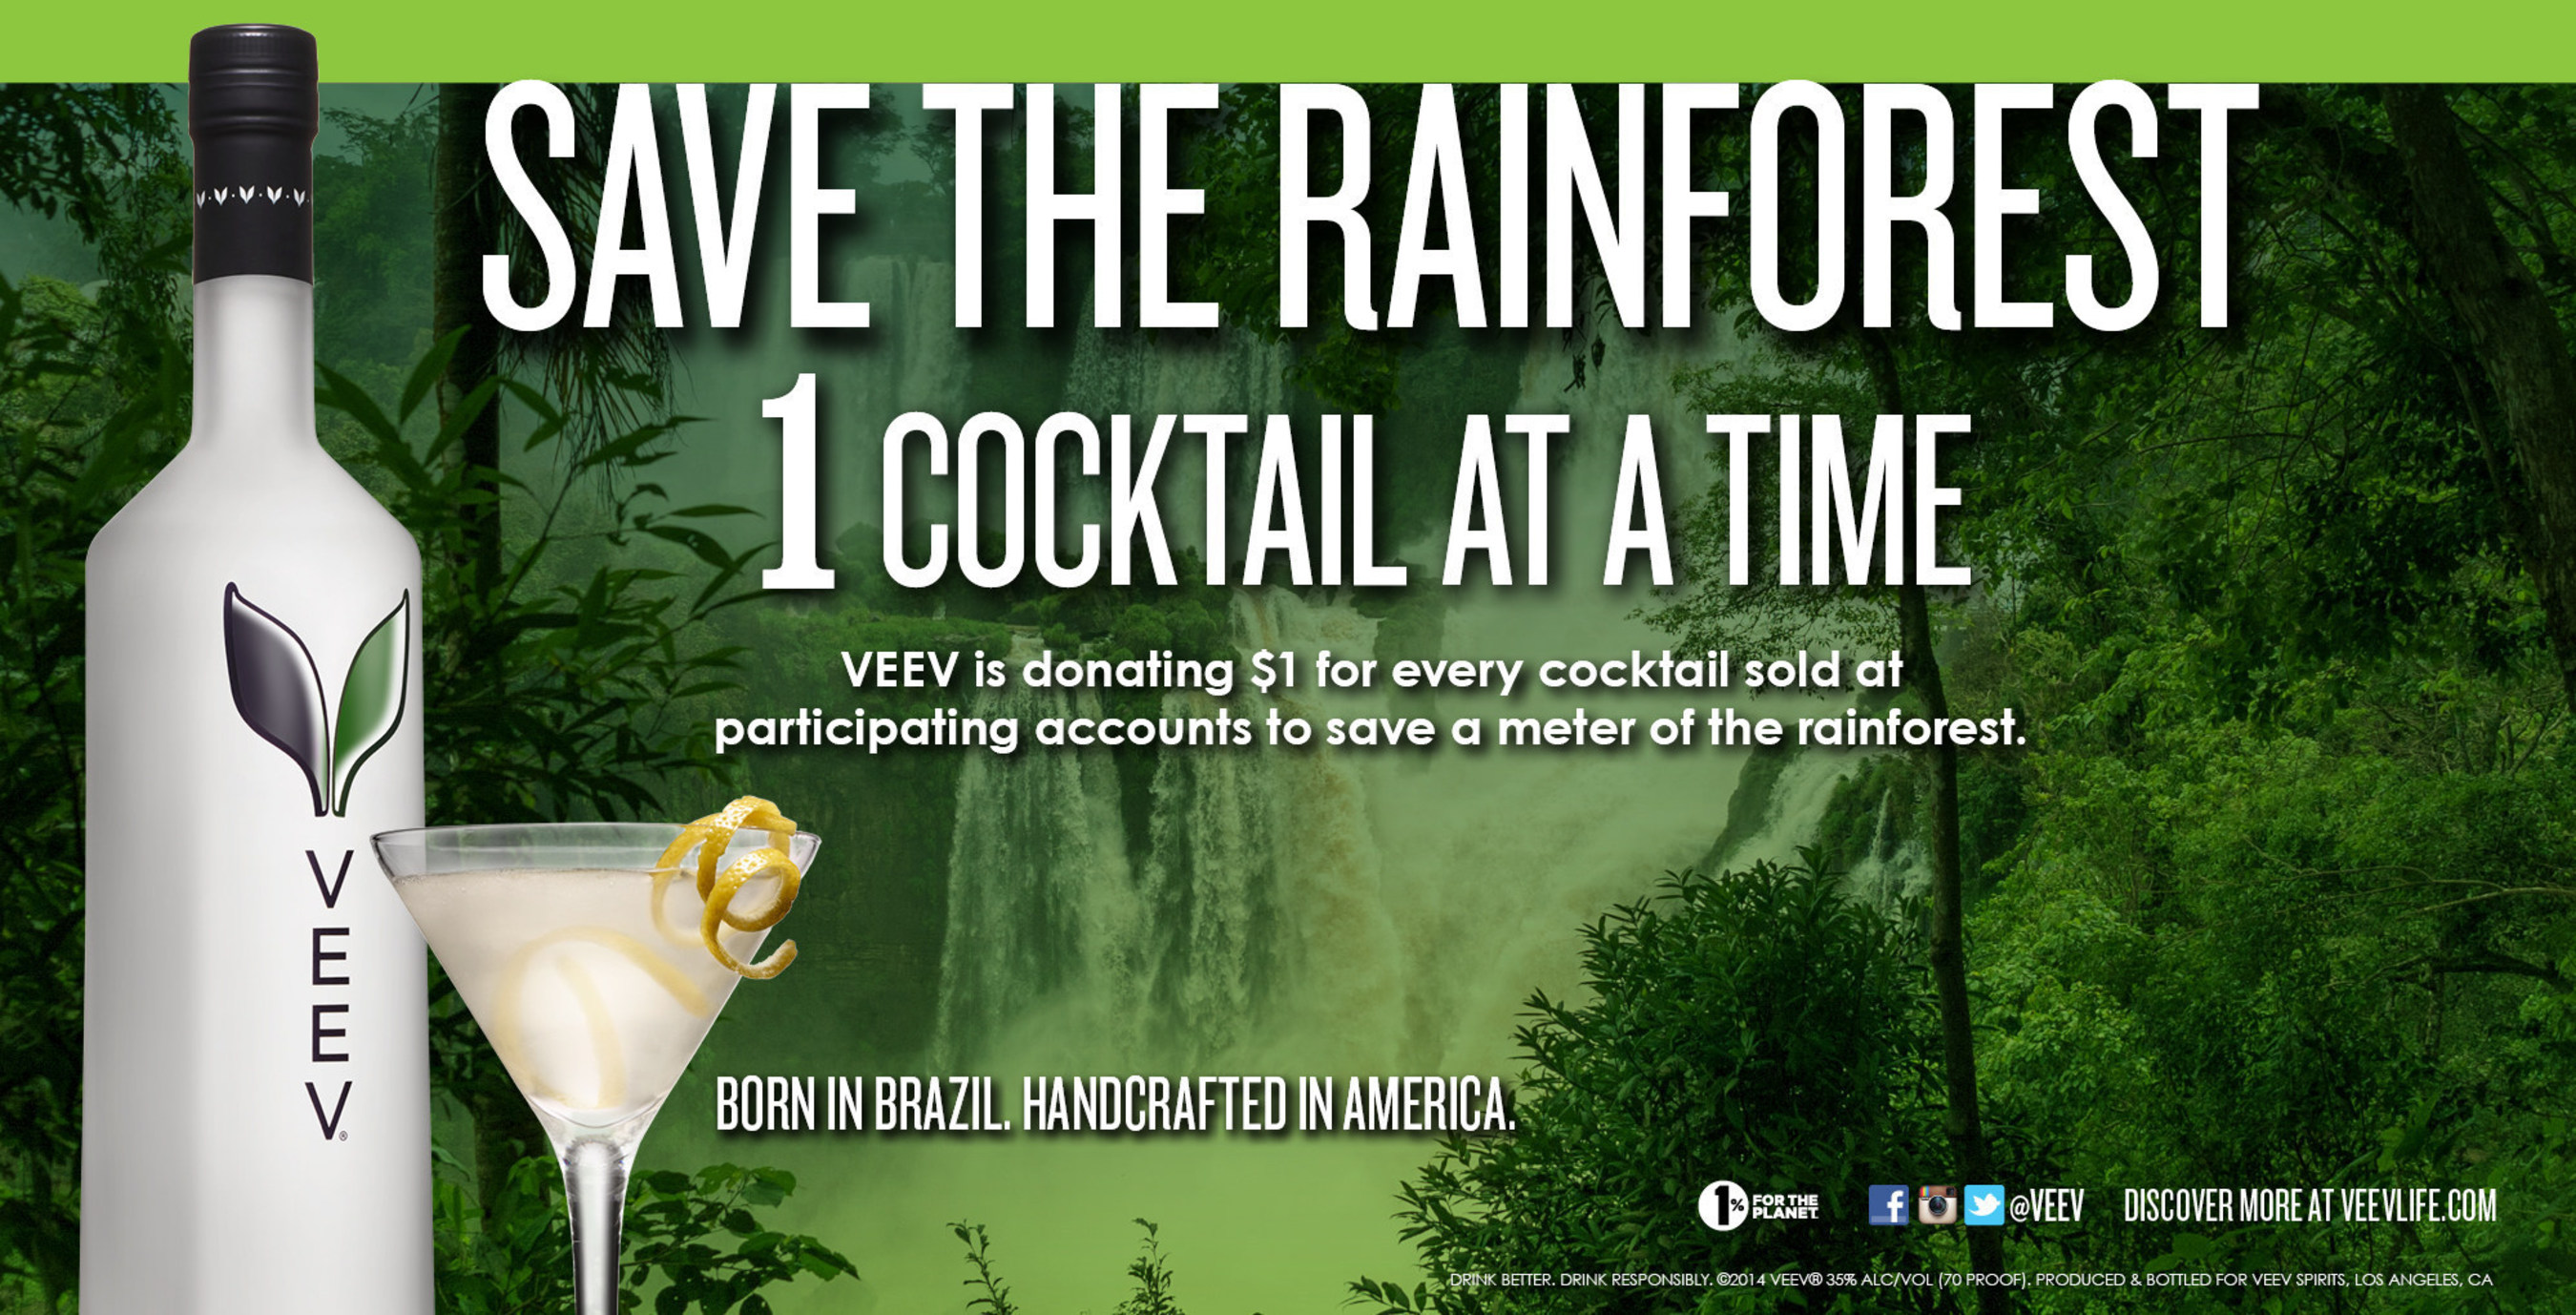 VEEV(R) Spirits Partners With Cuipo To Save The Rainforest One Cocktail At A Time. VEEV Spirits, is proud to announce a new partnership with Cuipo, a lifestyle brand dedicated to preserving prime rainforest around the globe. VEEV Spirits will be donating $1 for every drink sold through participating on-premise accounts (up to $30K), to Cuipo's non-profit foundation "One Meter at a Time," whose primary responsibility and mission is to protect and preserve the rainforest through education and brand activation.